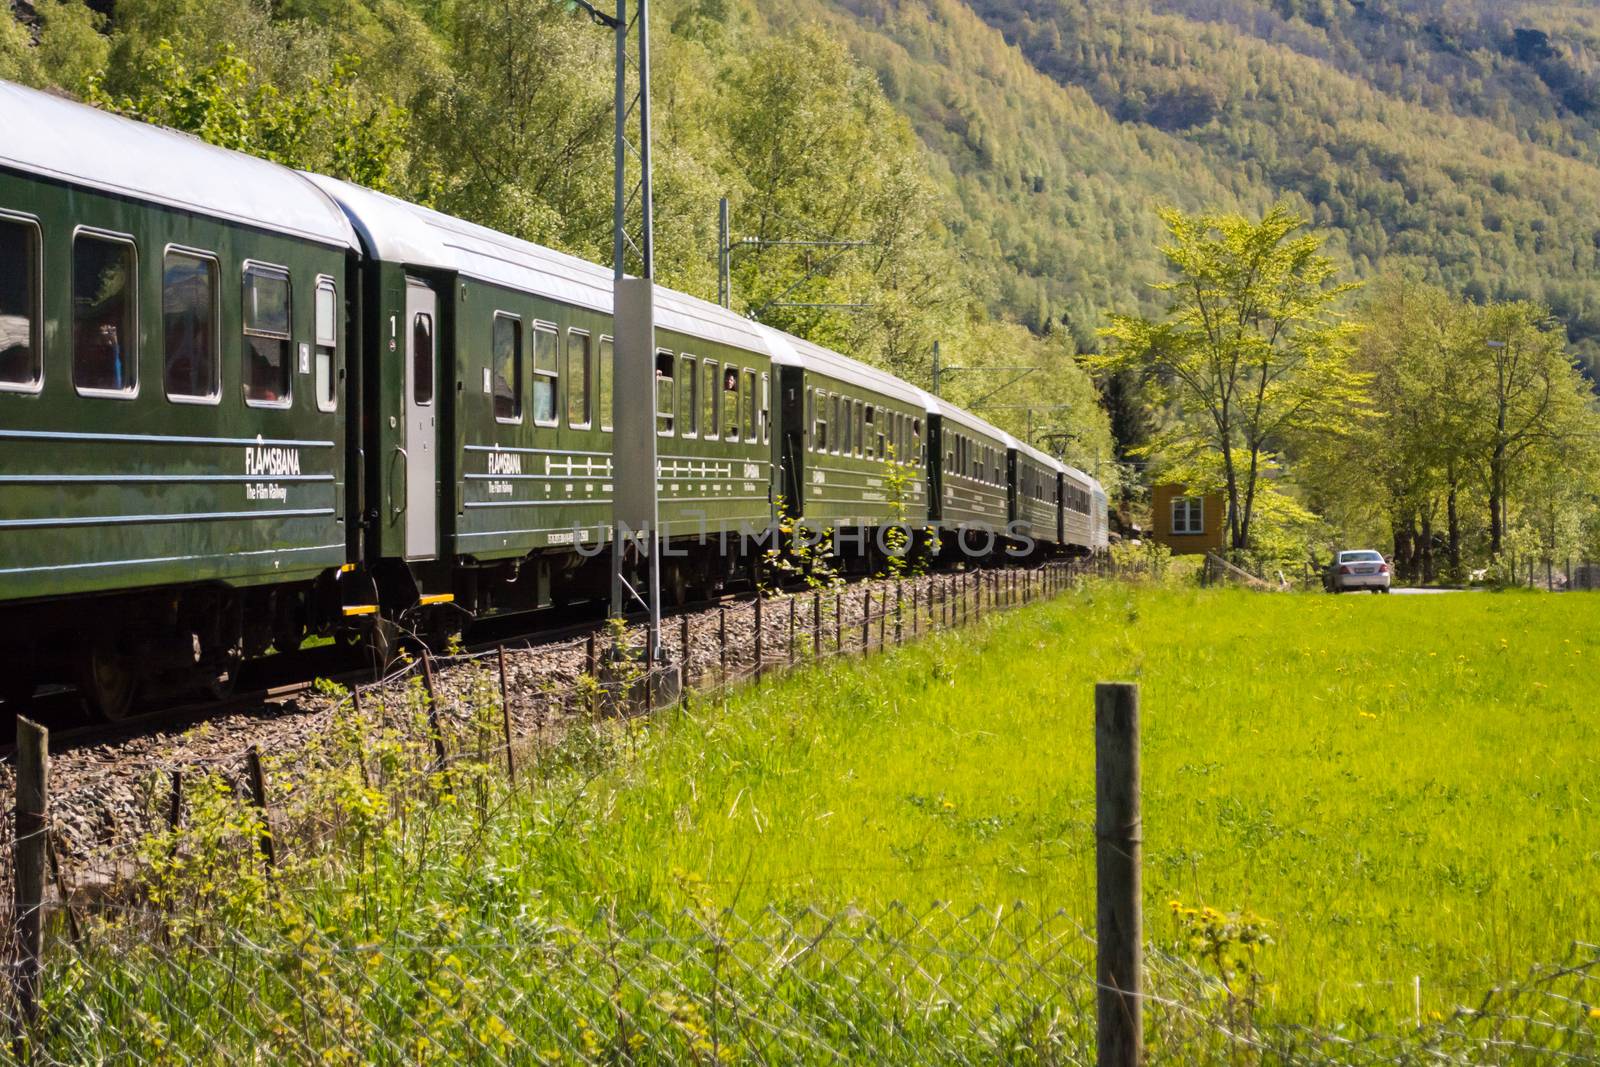 train carriages of the Flamsbana (Flam Line) running through a green valley. Flam railway is a railway line between Myrdal and Flåm in Aurland, Norway. by kb79